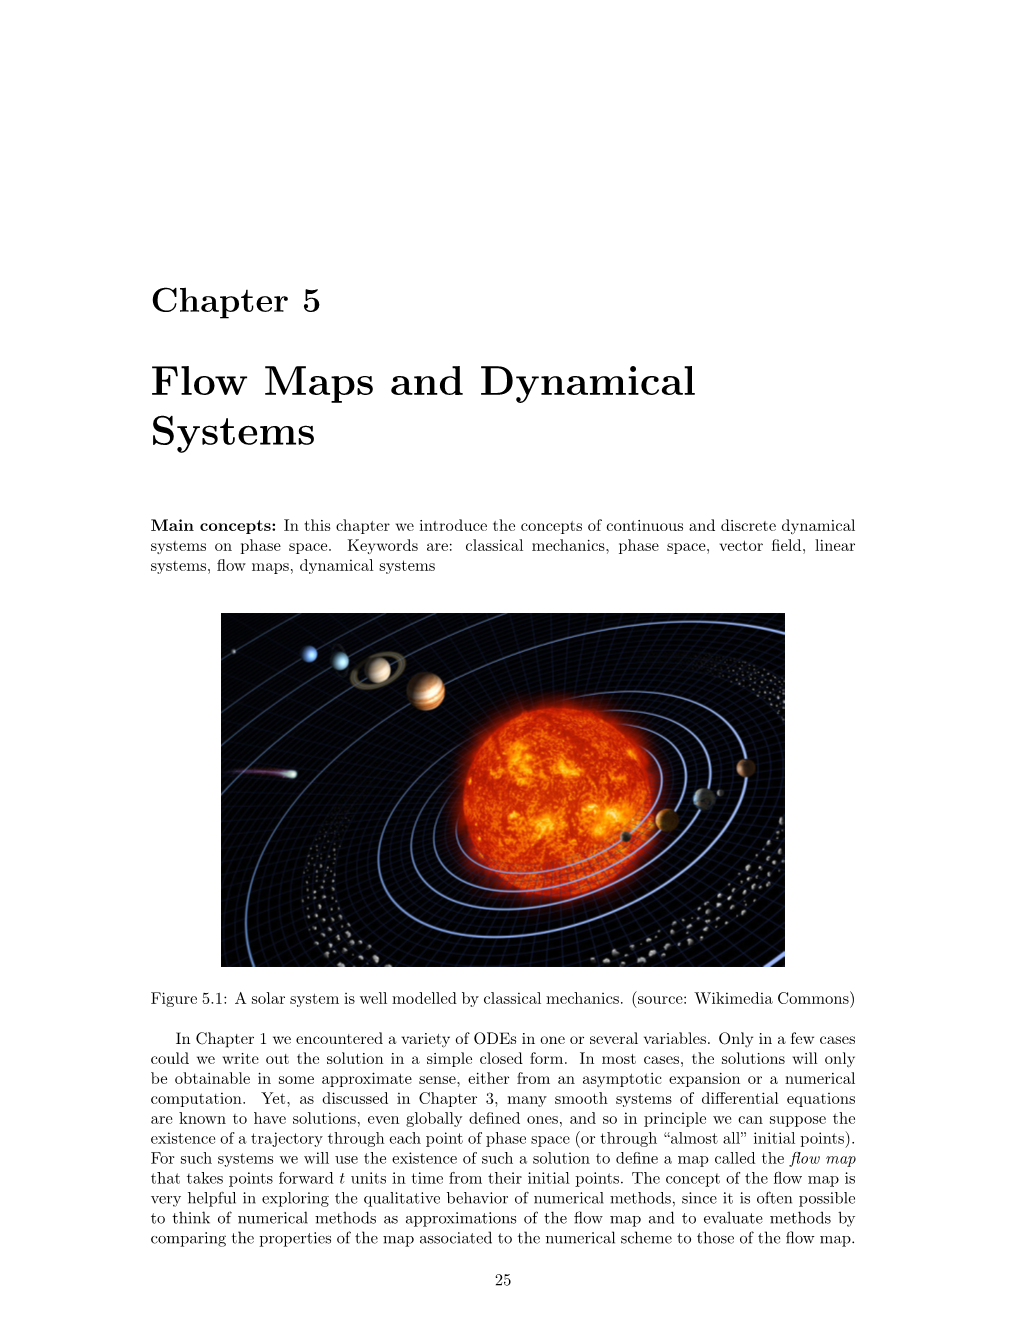 Chapter 5. Flow Maps and Dynamical Systems